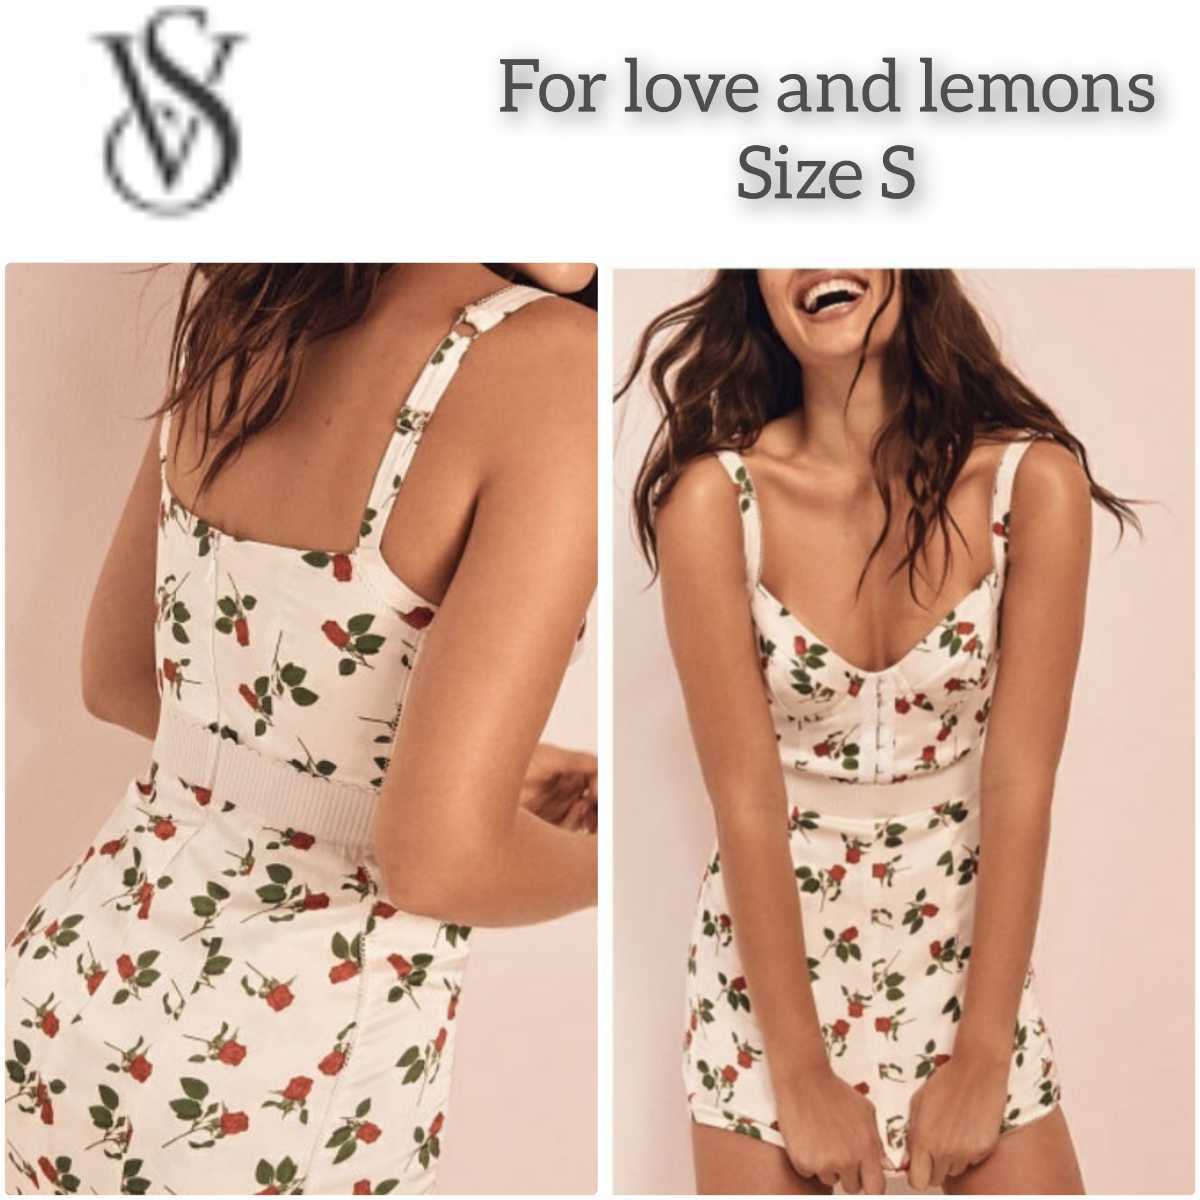 Paypayフリマ ヴィクトリアシークレット For Love And Lemons ワンピース 完売アイテム レア Love Song Dress S